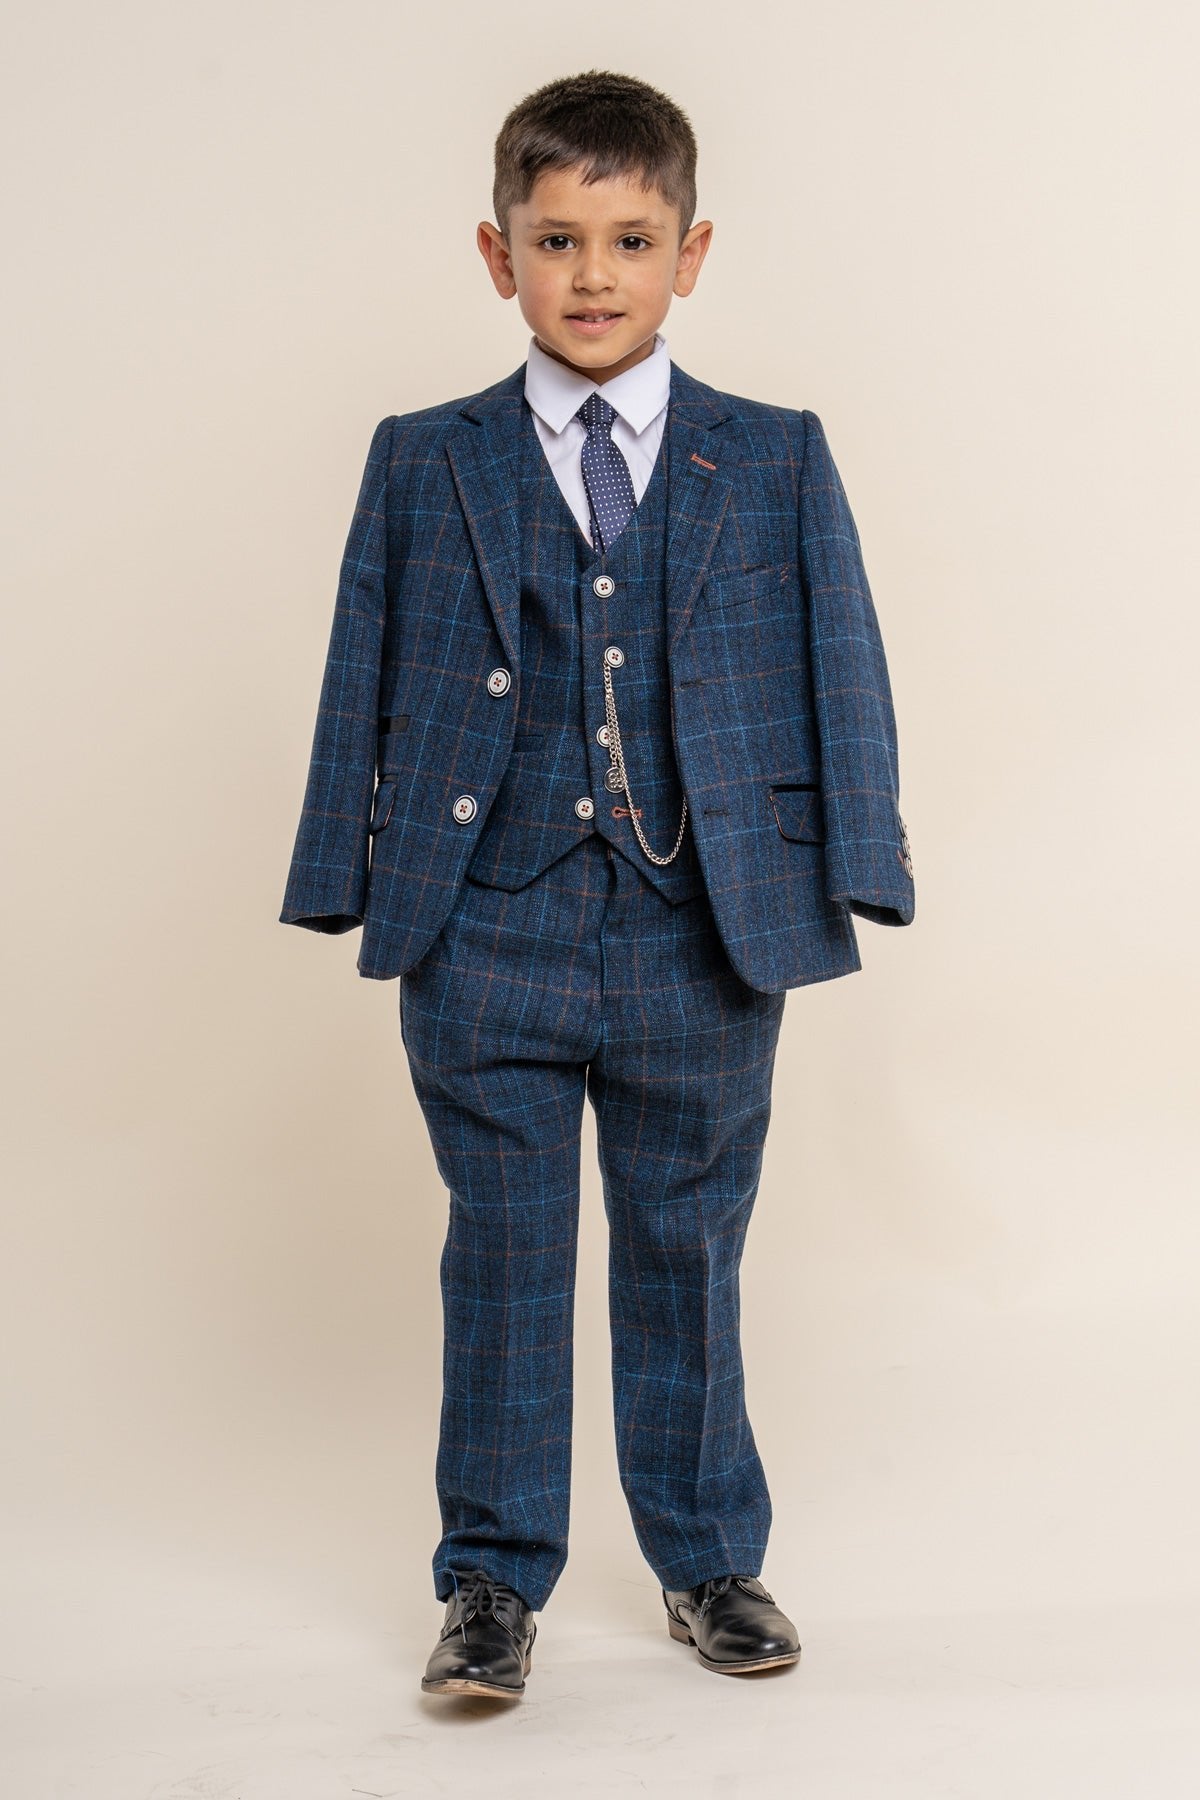 Cody Blue Check Boys 3 Piece Wedding Suit - Childrenswear - 1 - Swagger & Swoon